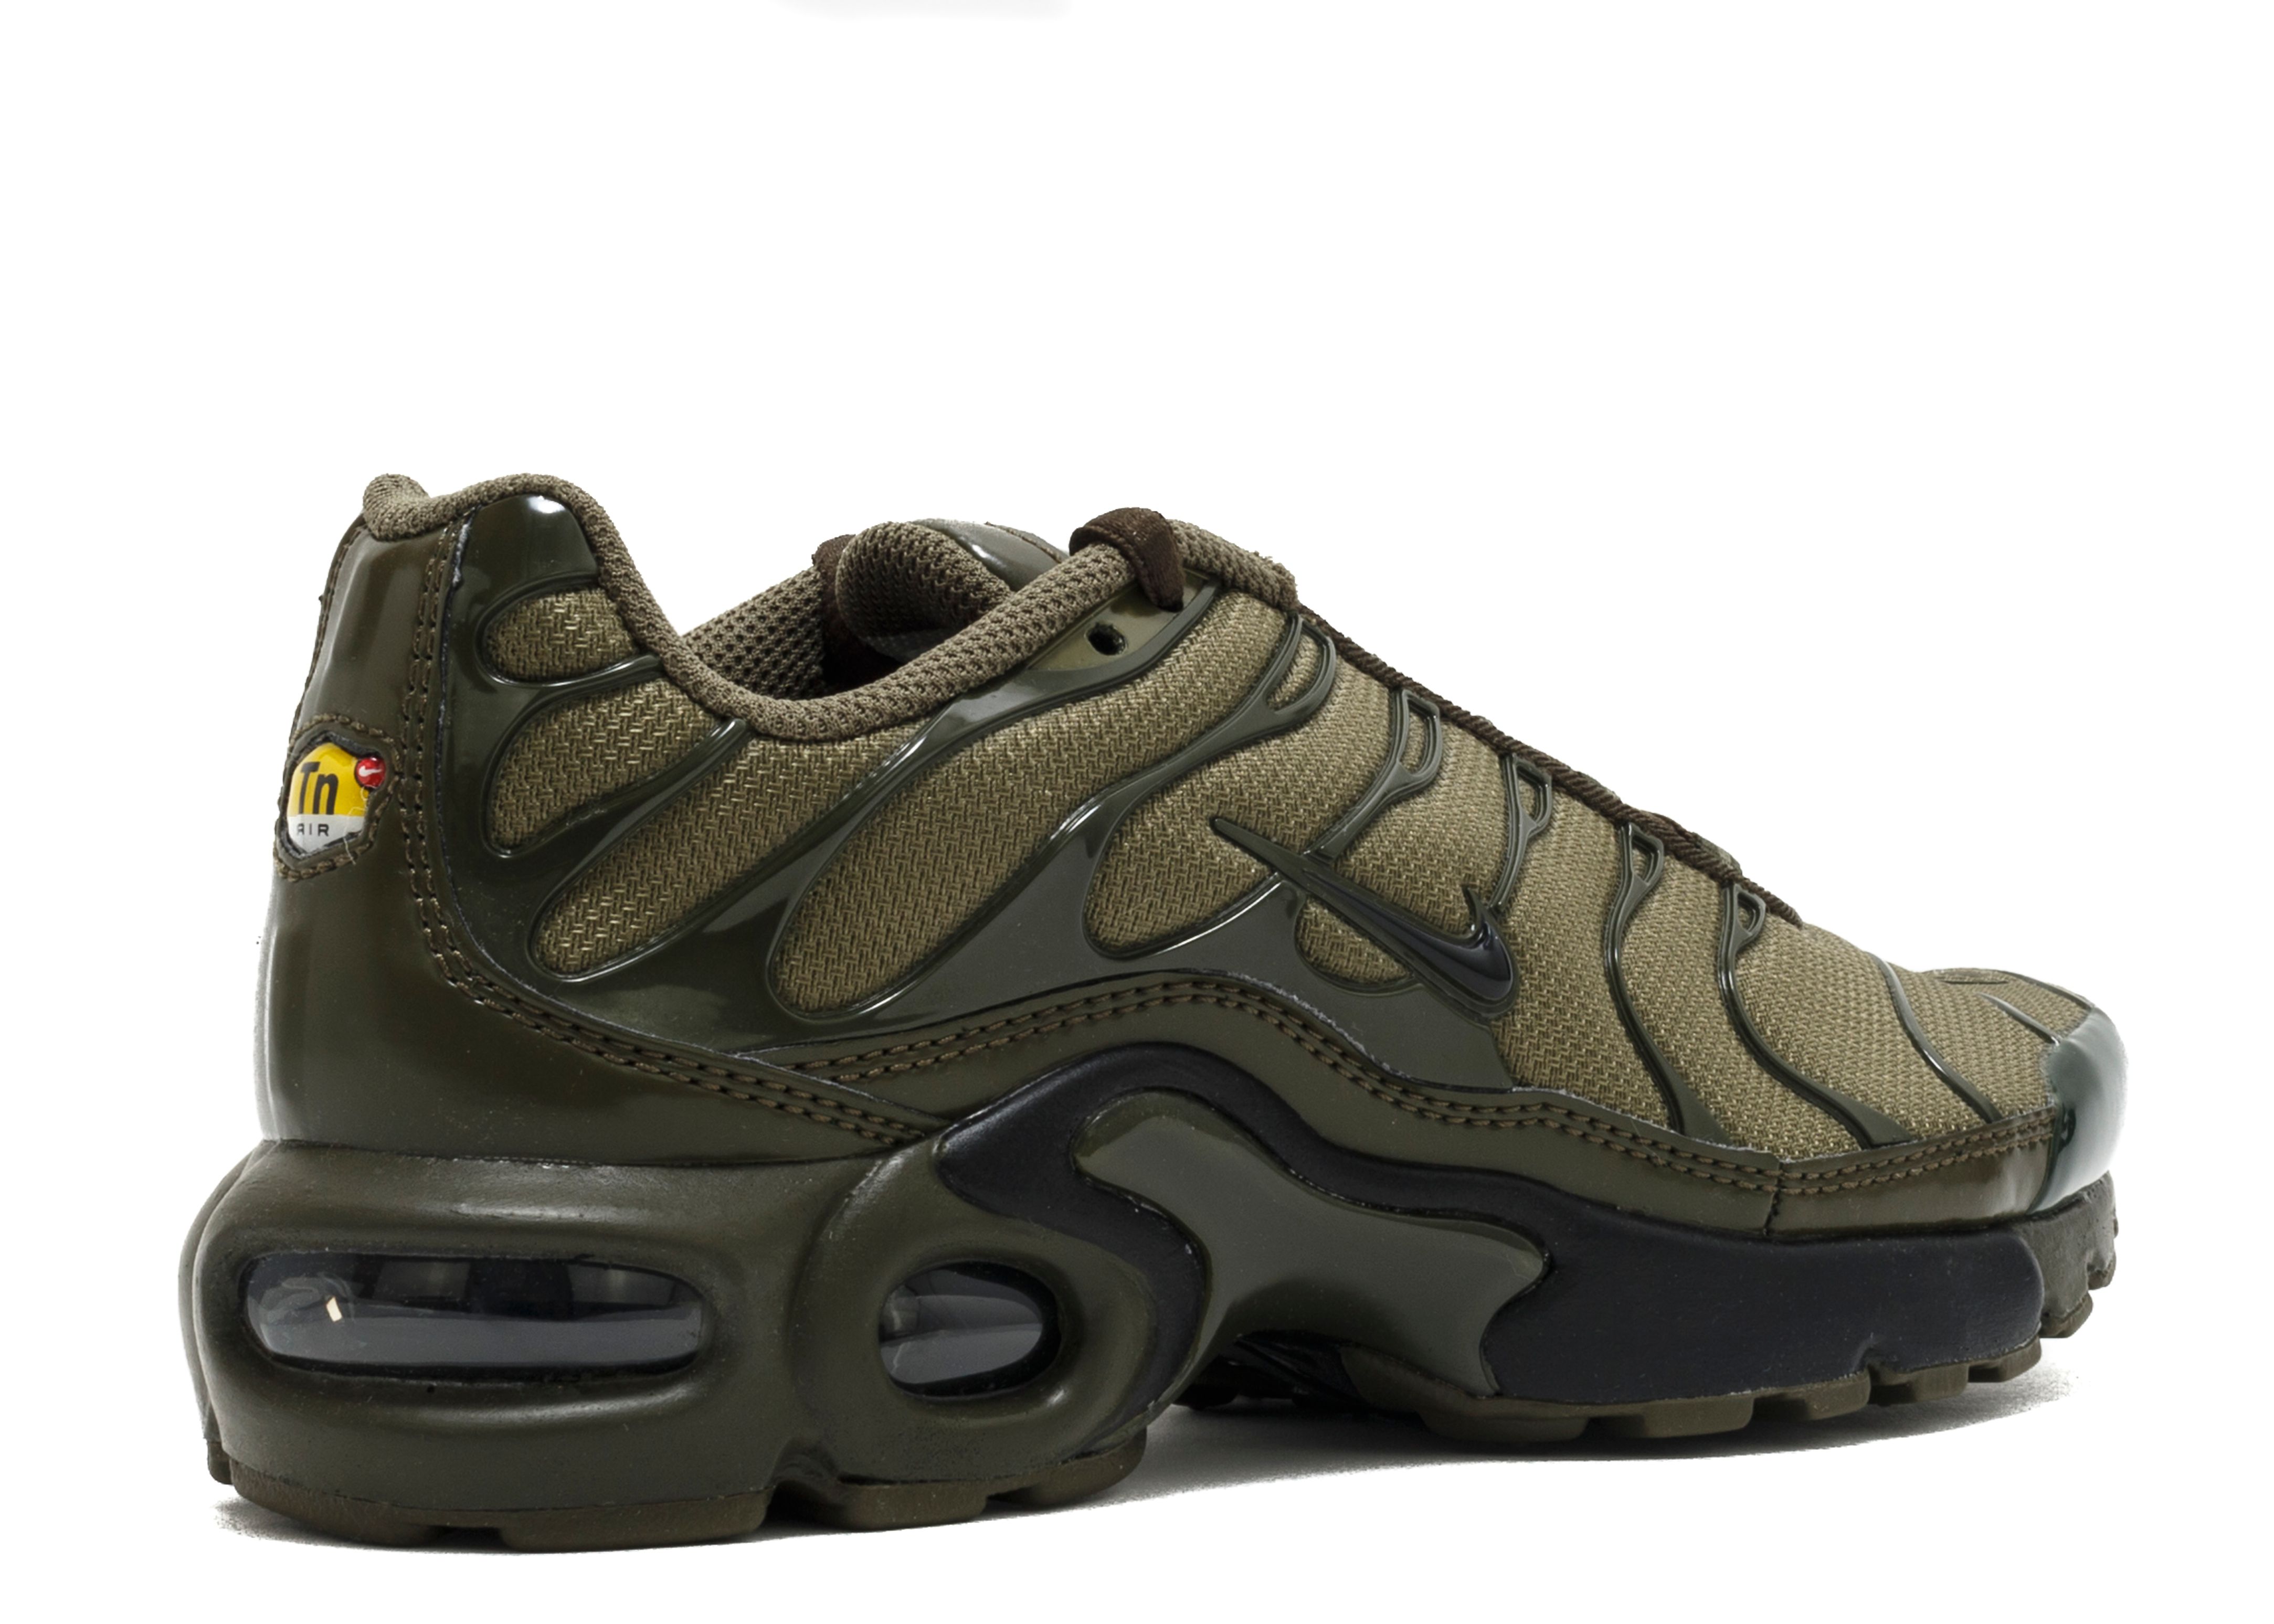 nike air max plus tuned 1 tn olive green unisex trainer limited edition